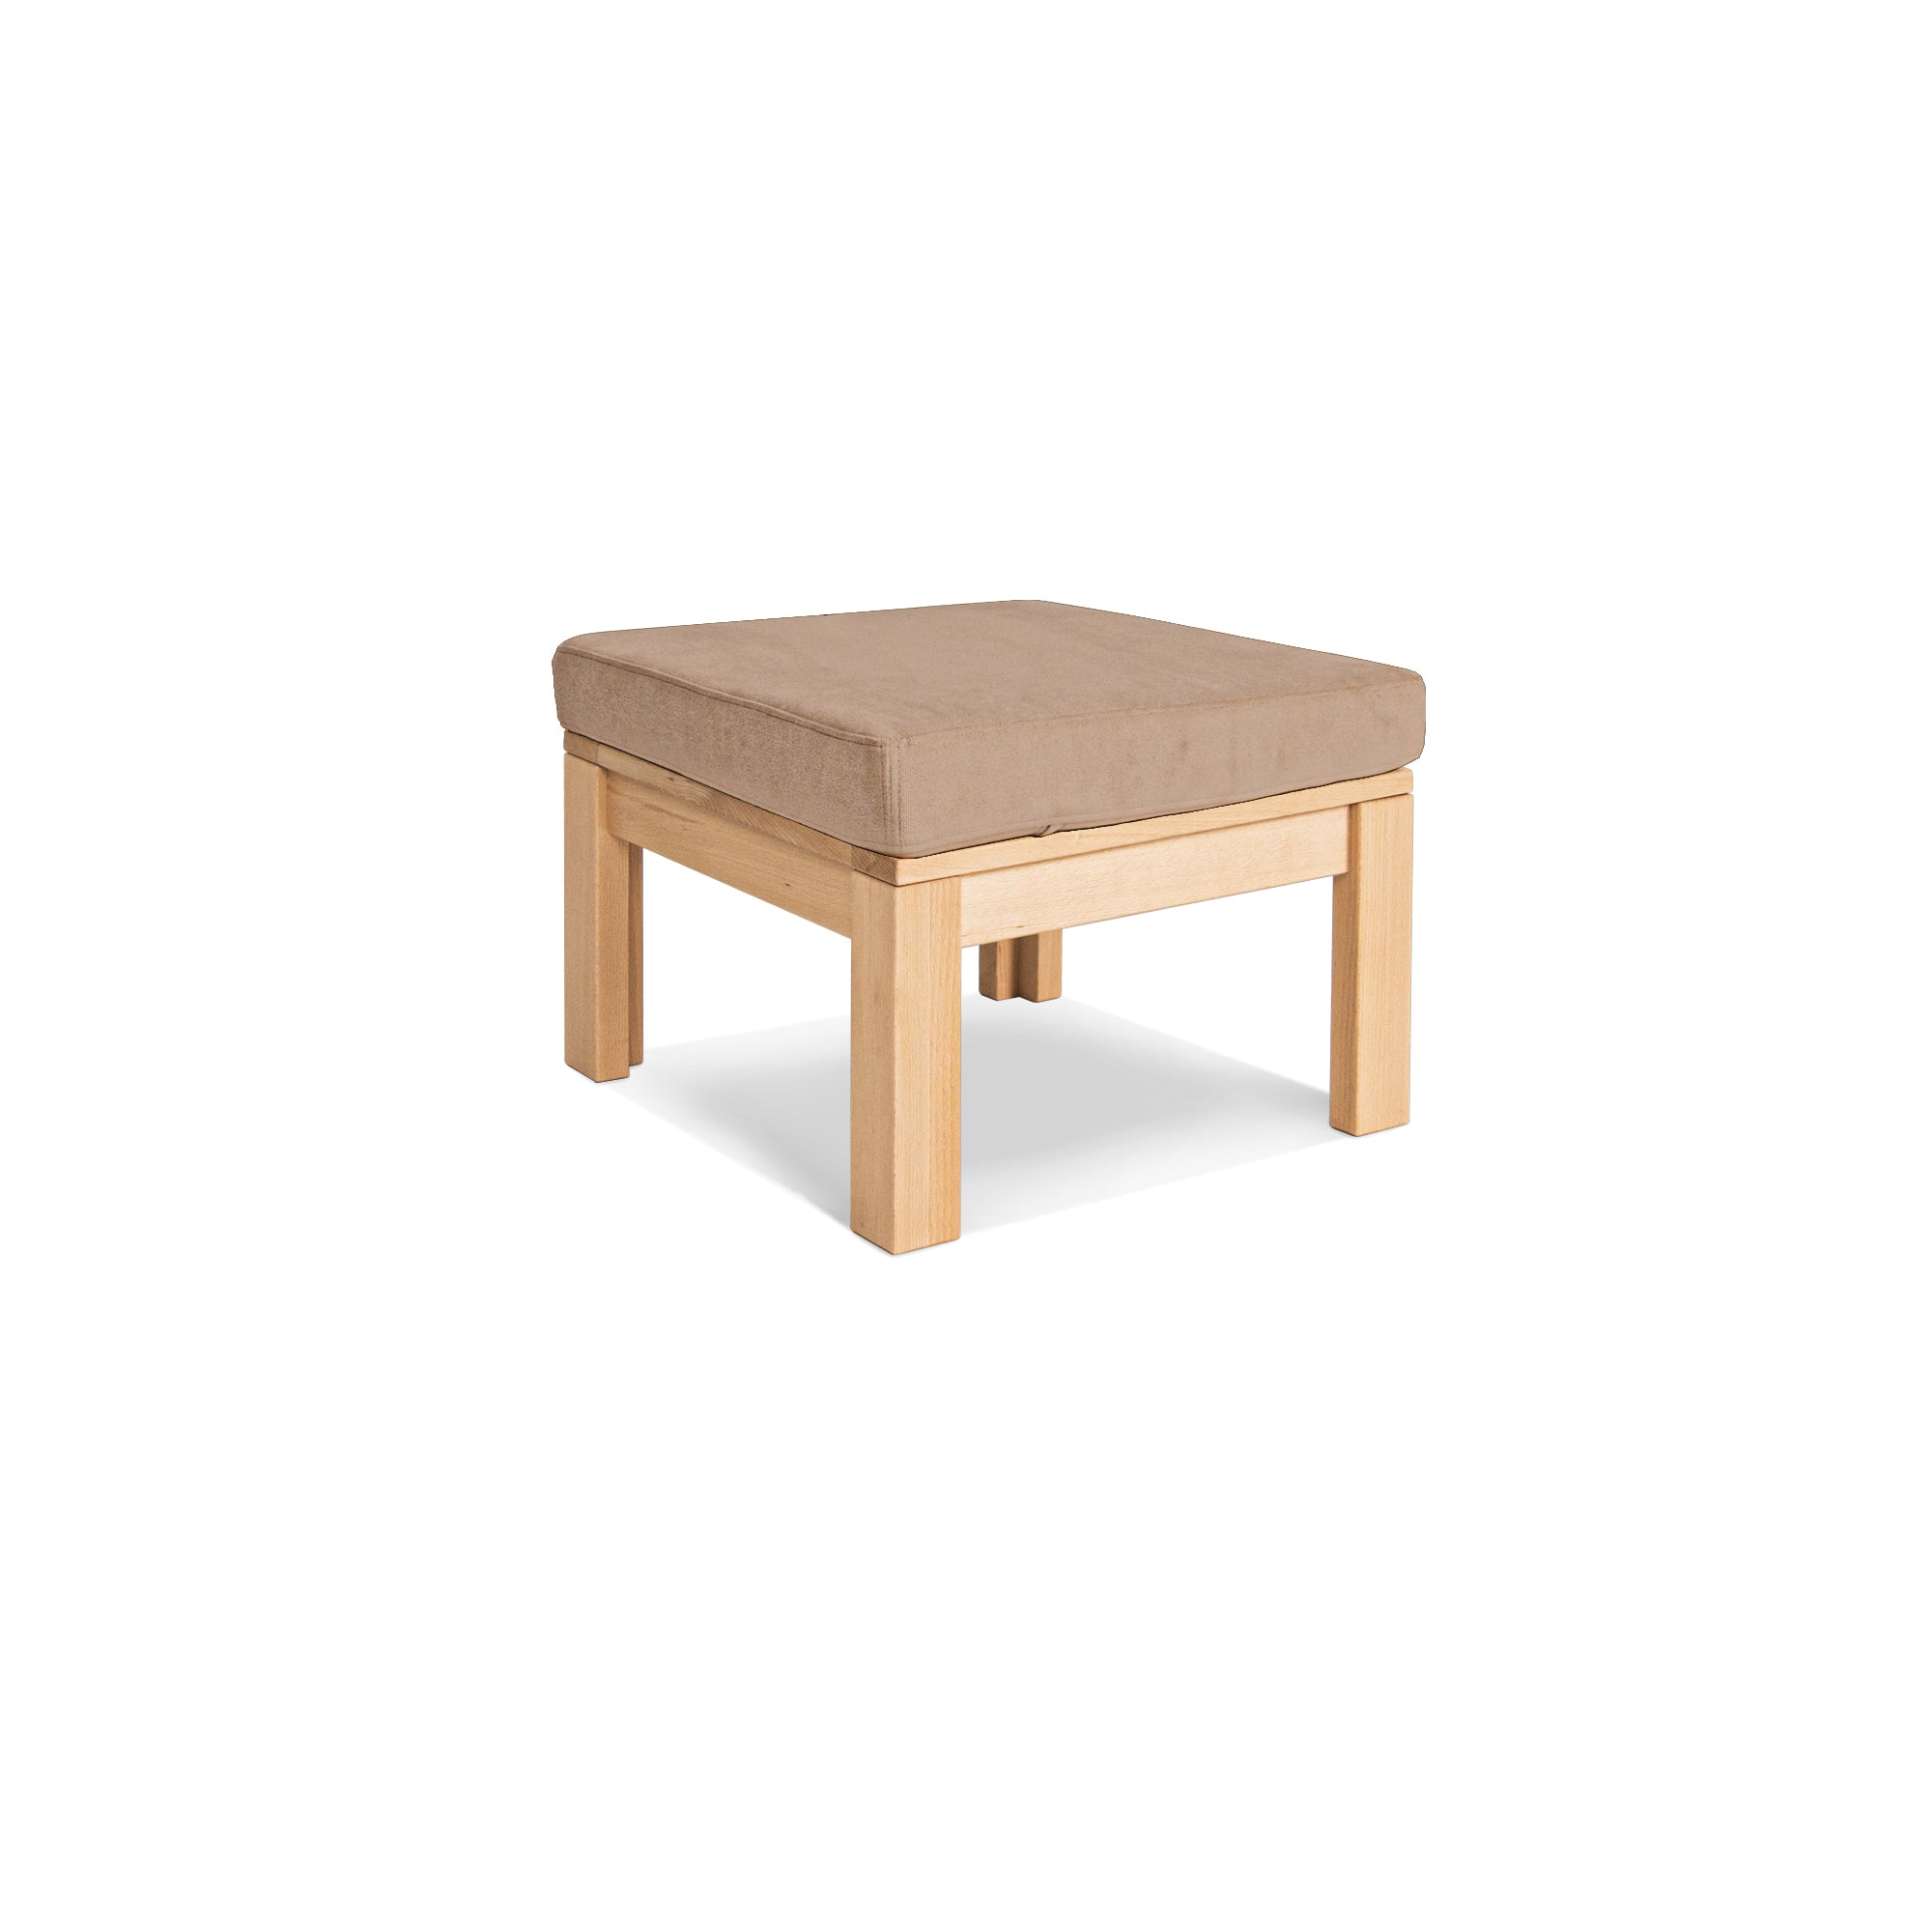 MEXICO Table Pouffe- Beech Wood beige fabric colour